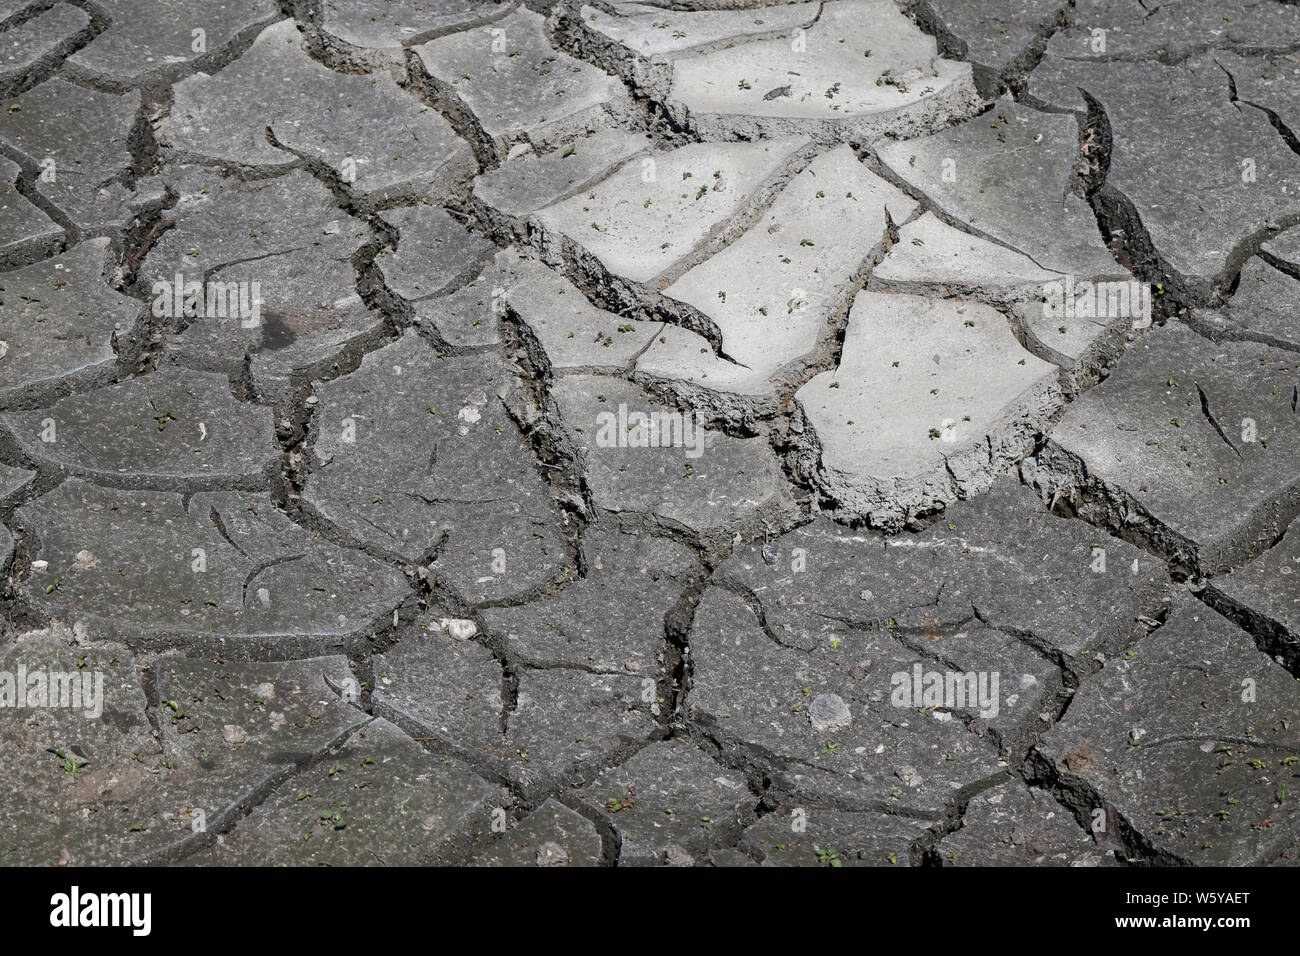 Cracked ground because of hot and dry weather. Would the earth look like this is global warning continues? Environmental conservation themed photo. Stock Photo